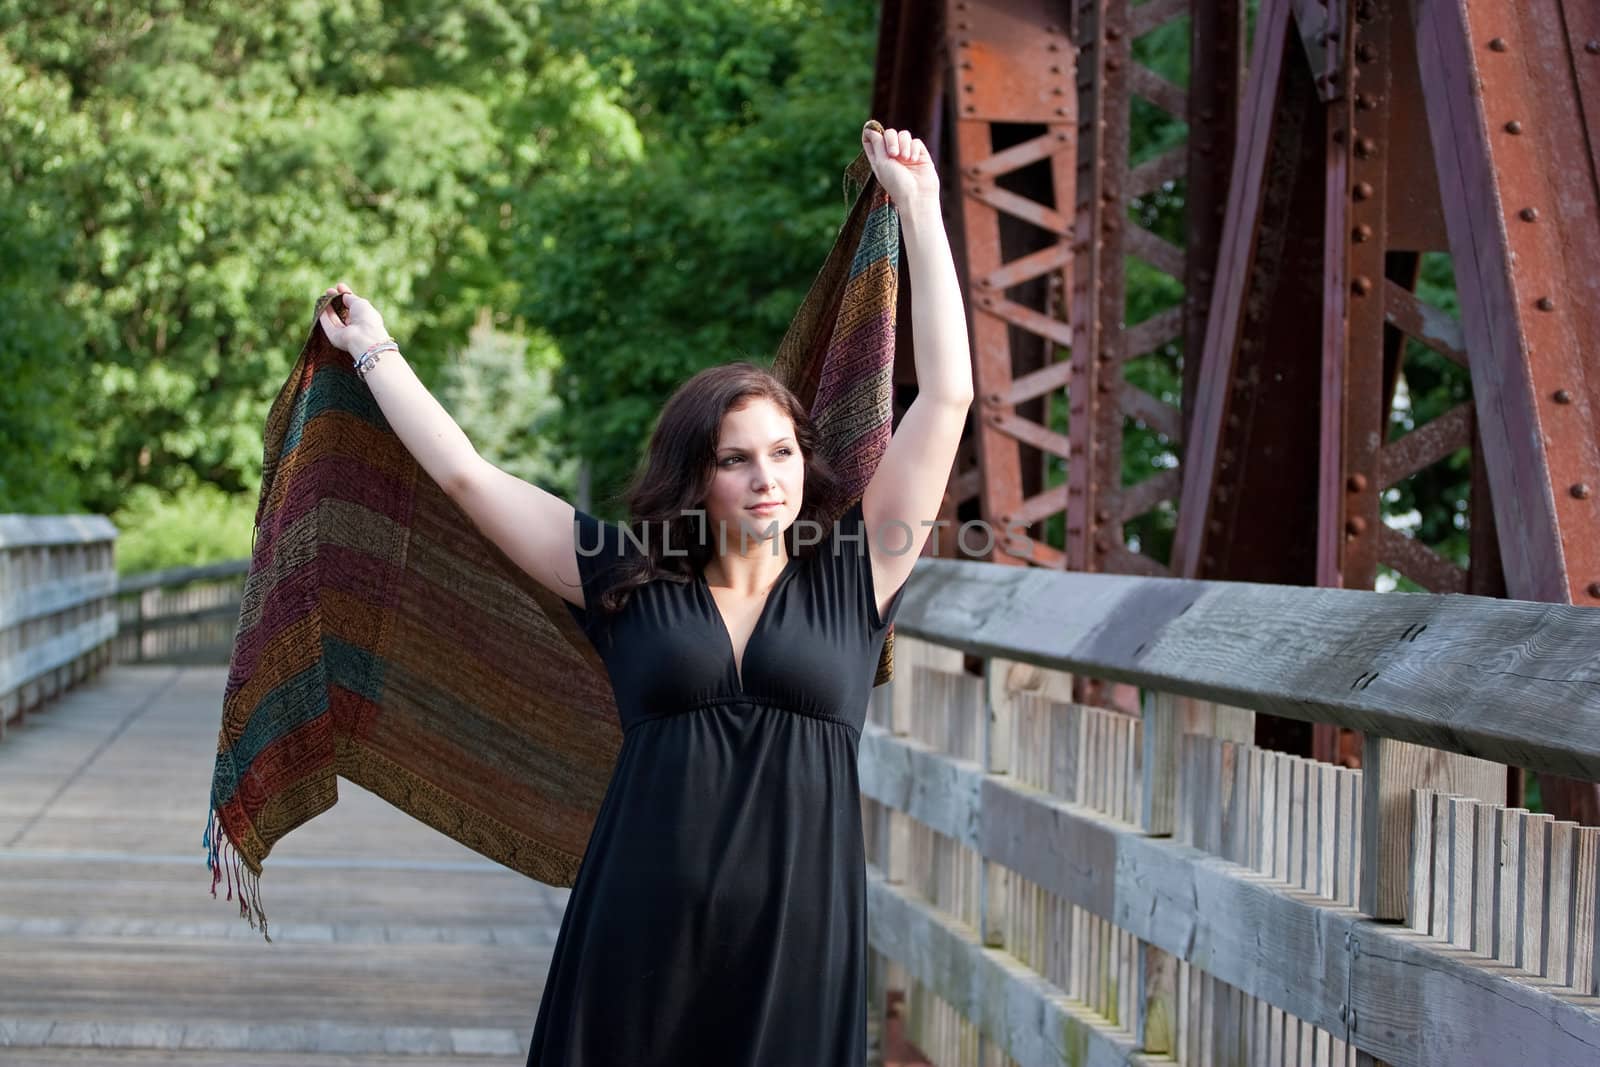 A carefree brunette woman running along a bridge with a scarf blowing in the breeze.